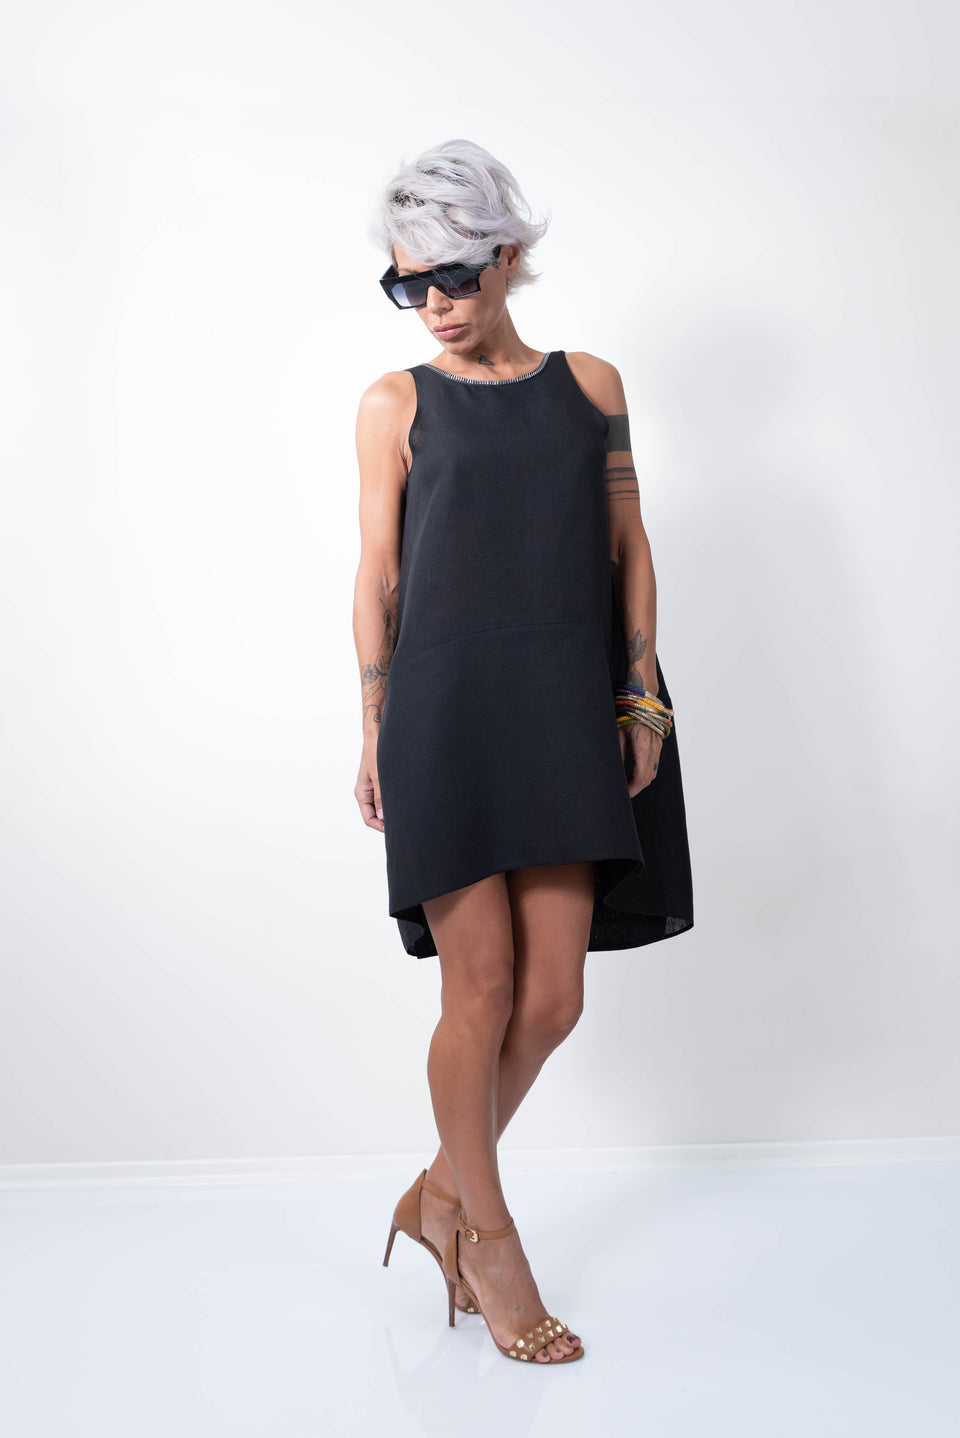 Linen Little Black Dress With a Zipper on the Back - Clothes By Locker Room